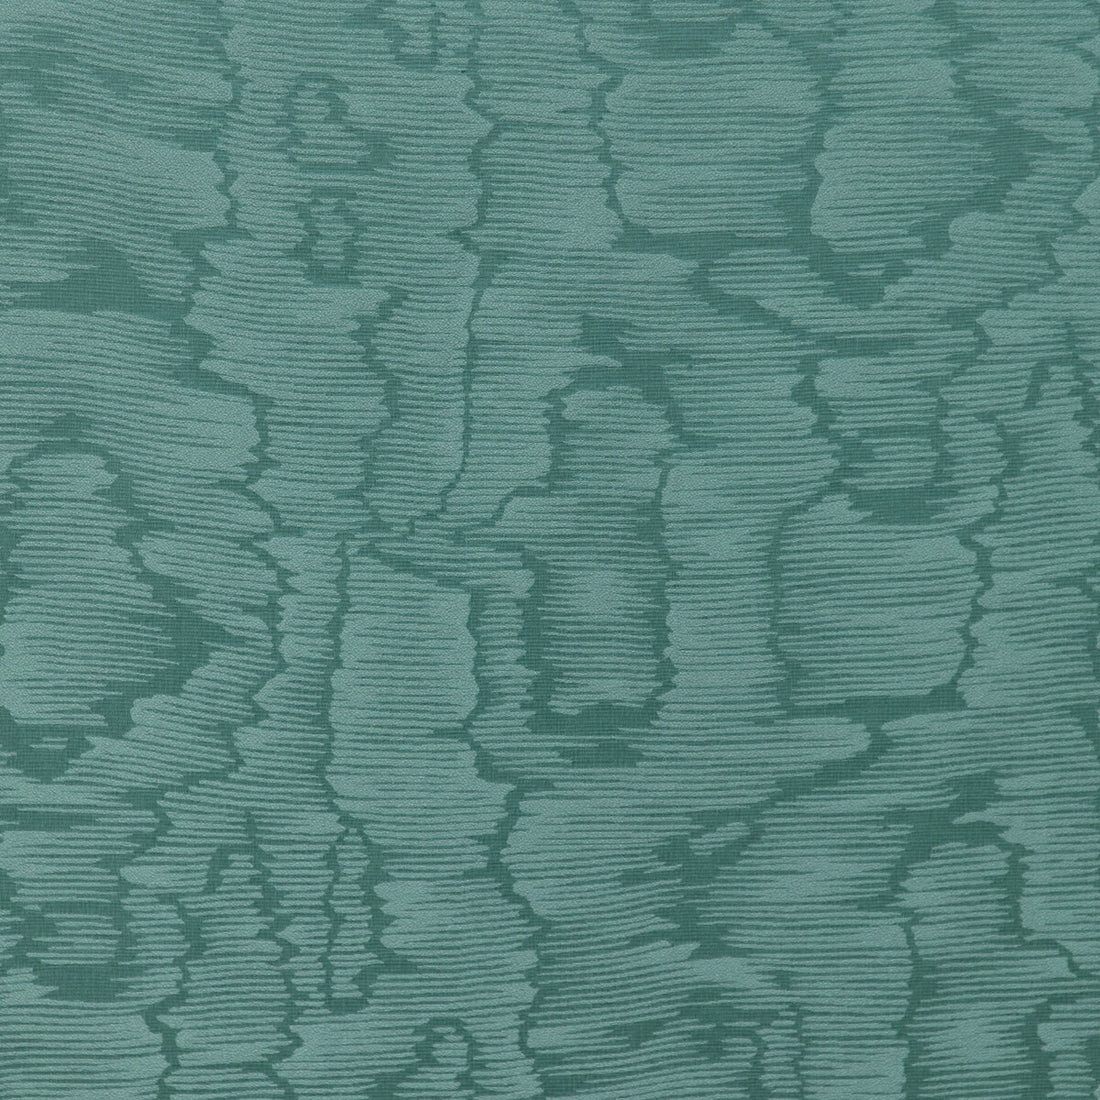 Lyon Weave fabric in lagoon color - pattern 8023145.13.0 - by Brunschwig &amp; Fils in the Vienne Silks collection